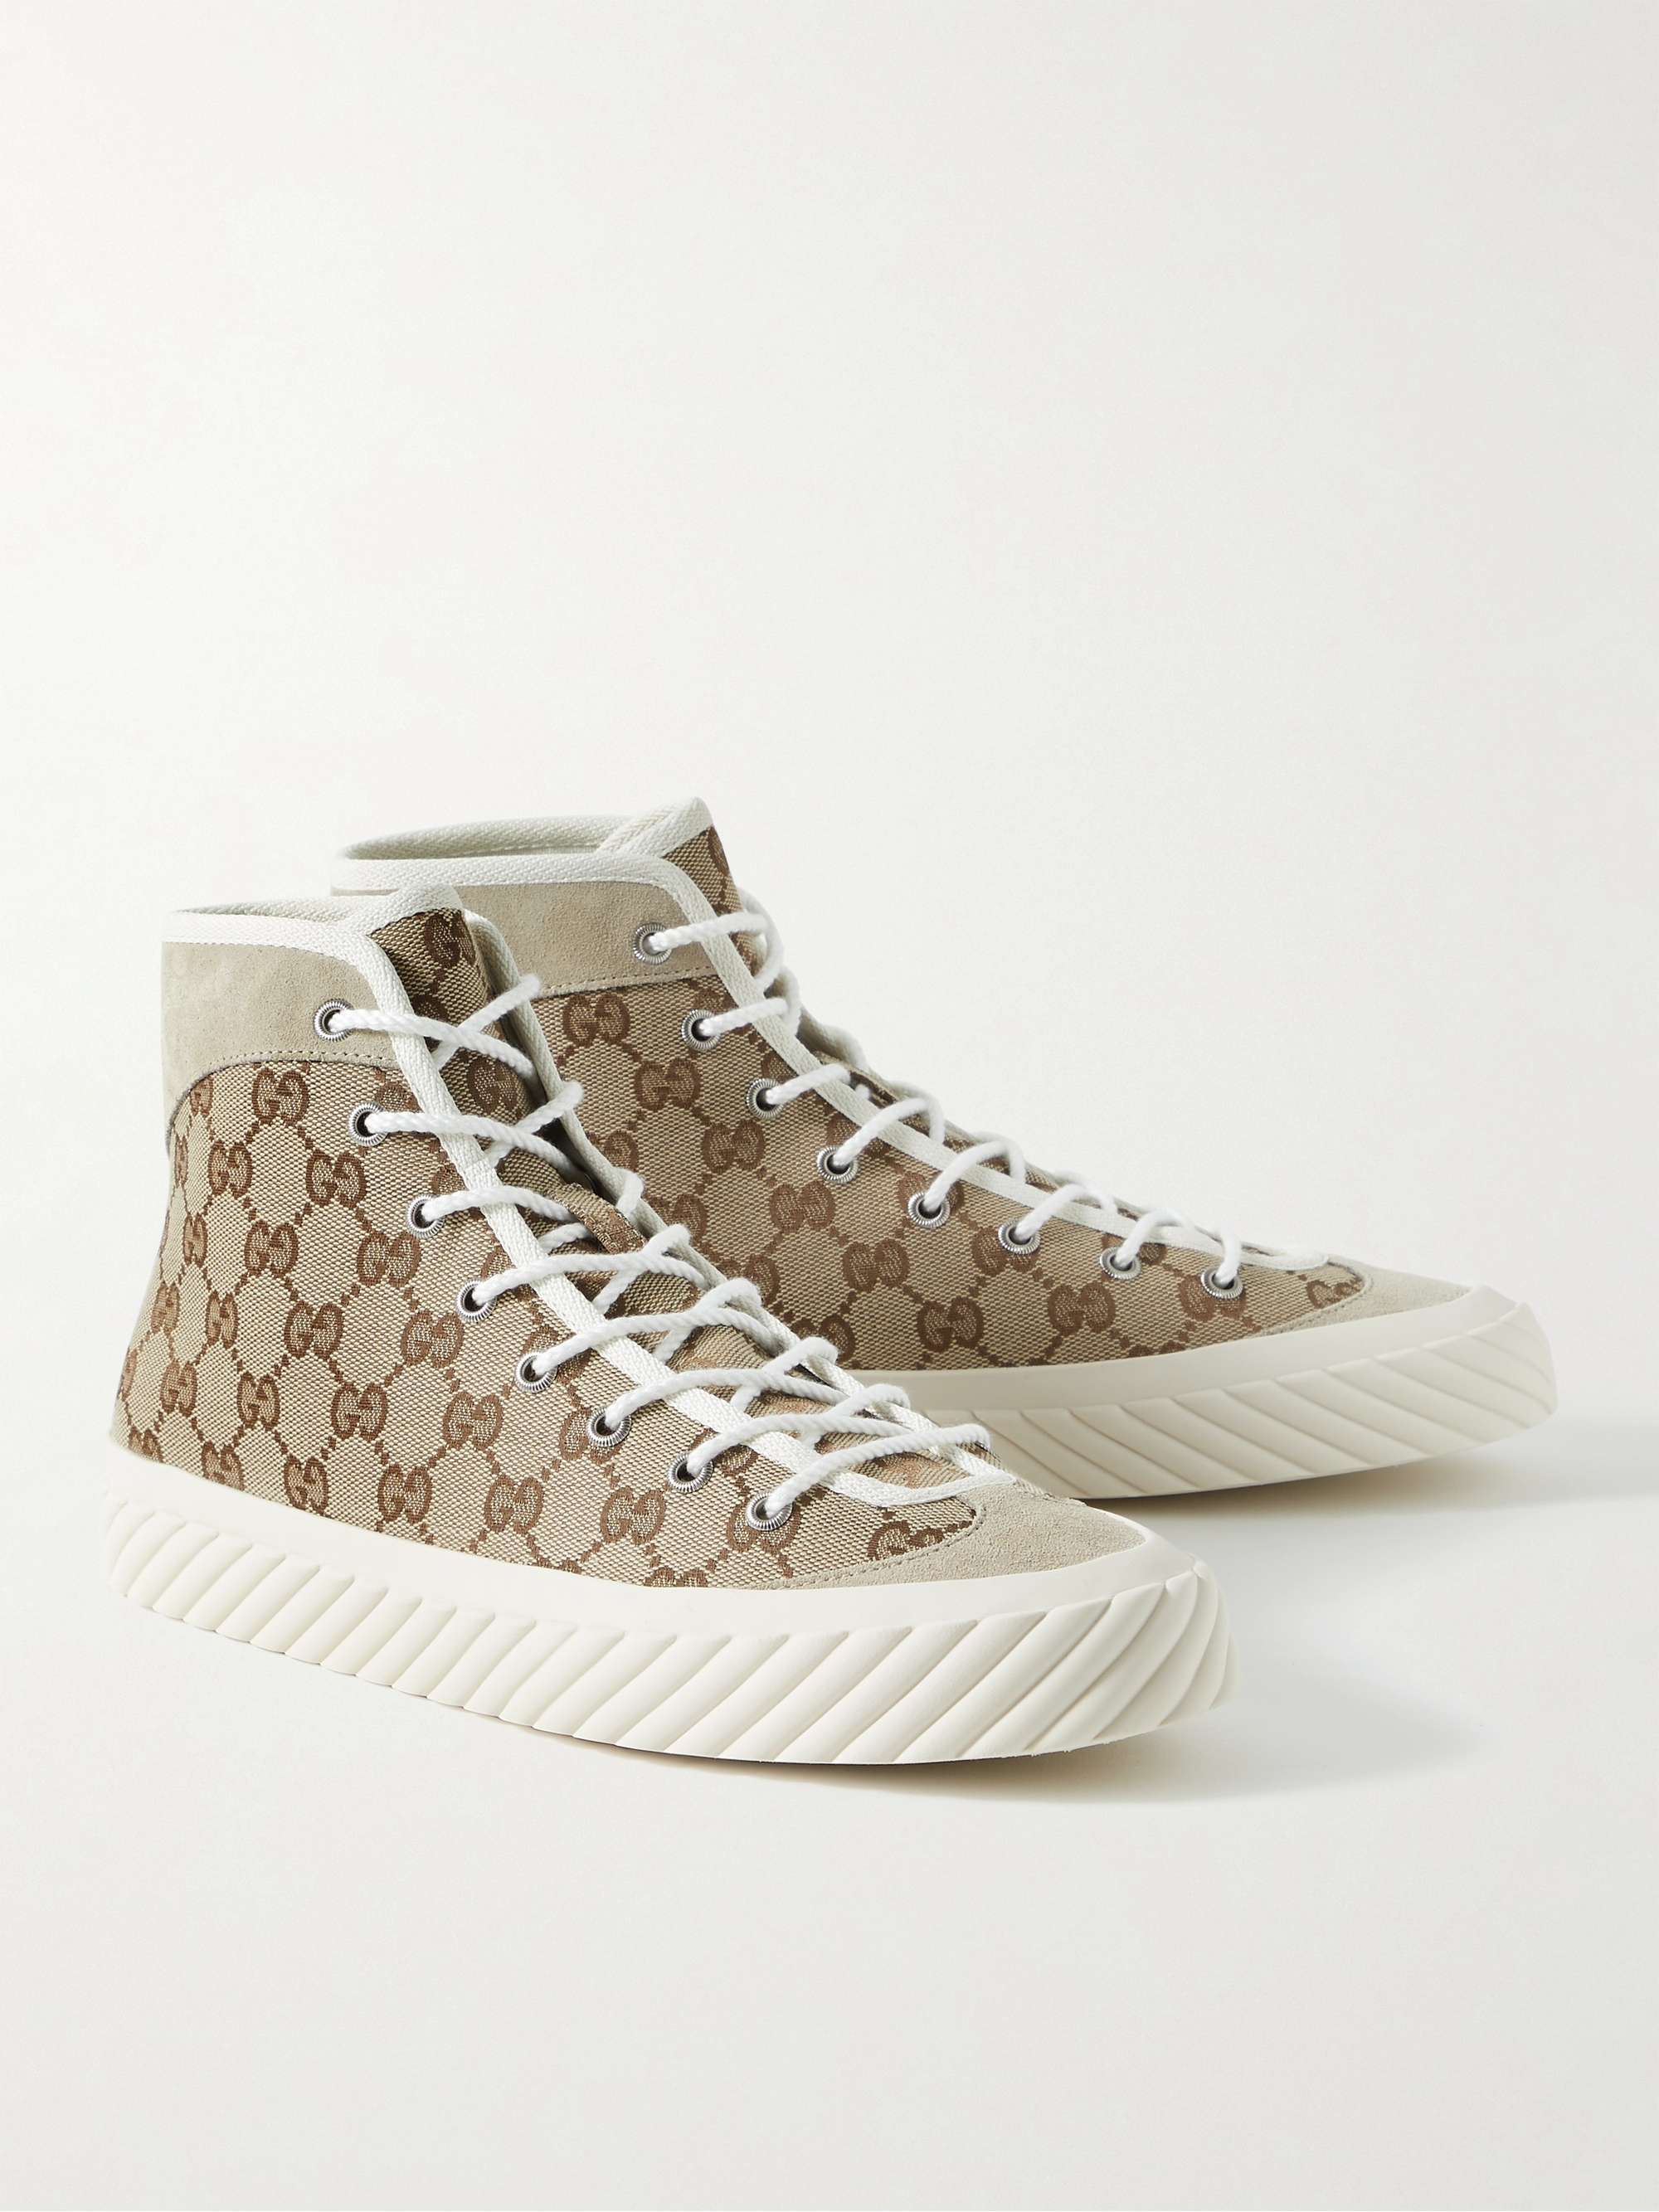 GUCCI Suede-Trimmed Monogrammed Canvas High-Top Sneakers | MR PORTER